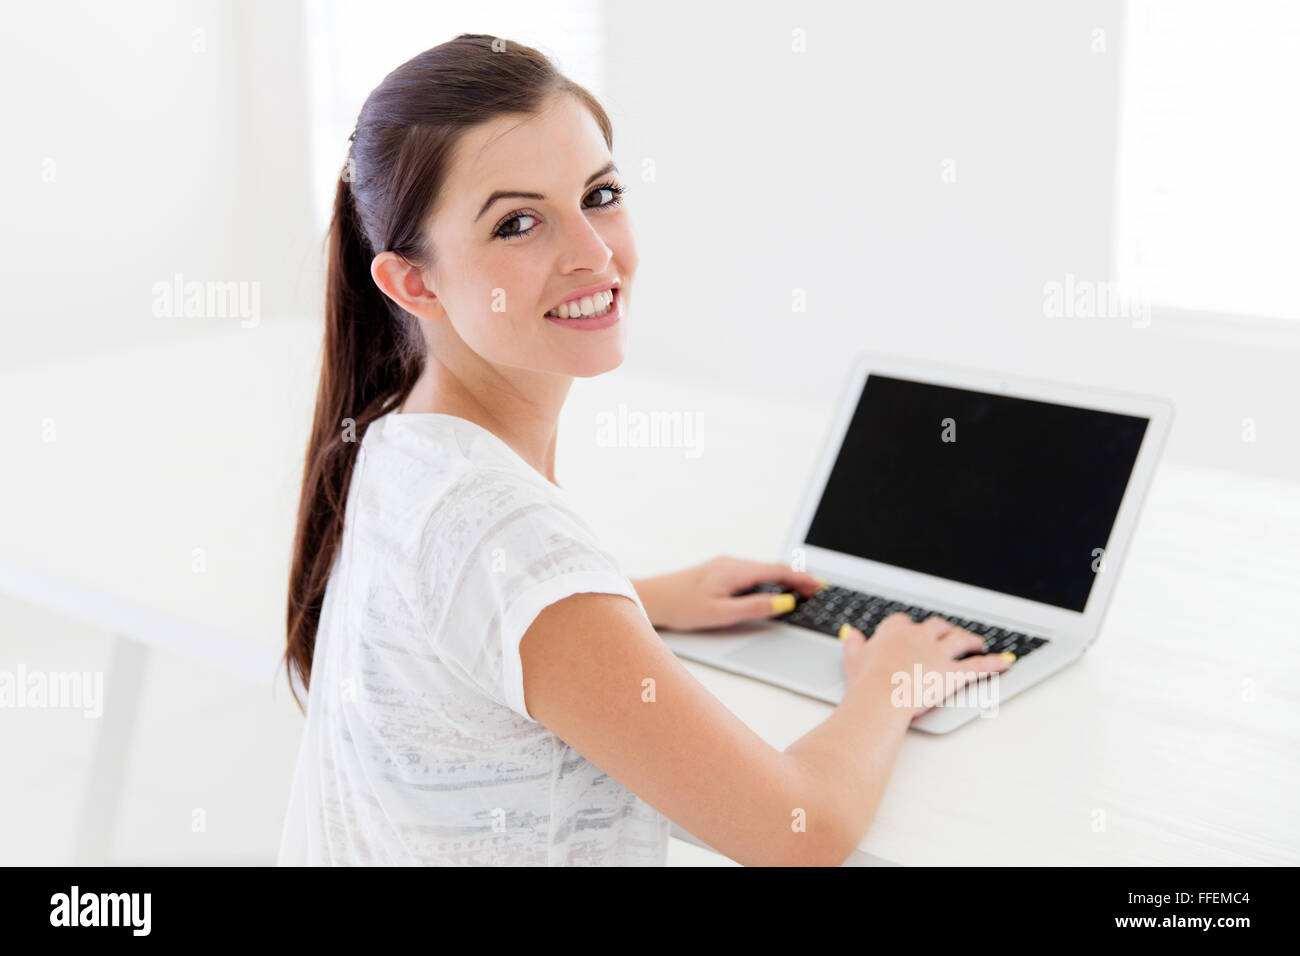 Happy teen girl using laptop computer at home Banque D'Images